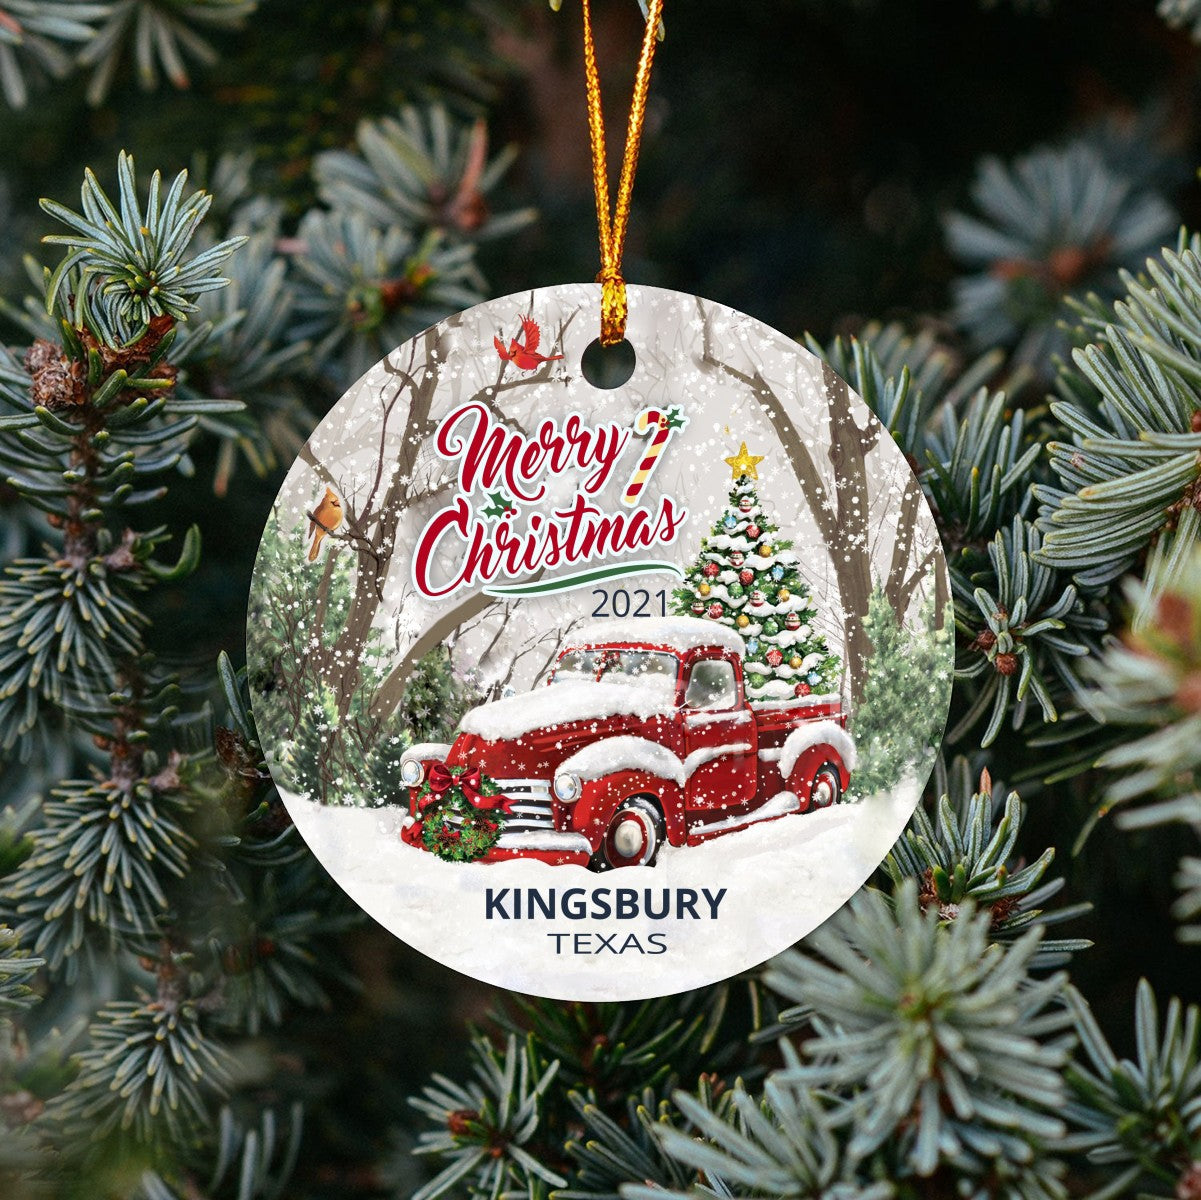 Christmas Tree Ornaments Kingsbury - Ornament With Name City, State Kingsbury Texas TX Ornament - Red Truck Xmas Ornaments 3'' Plastic Gift For Family, Friend And Housewarming